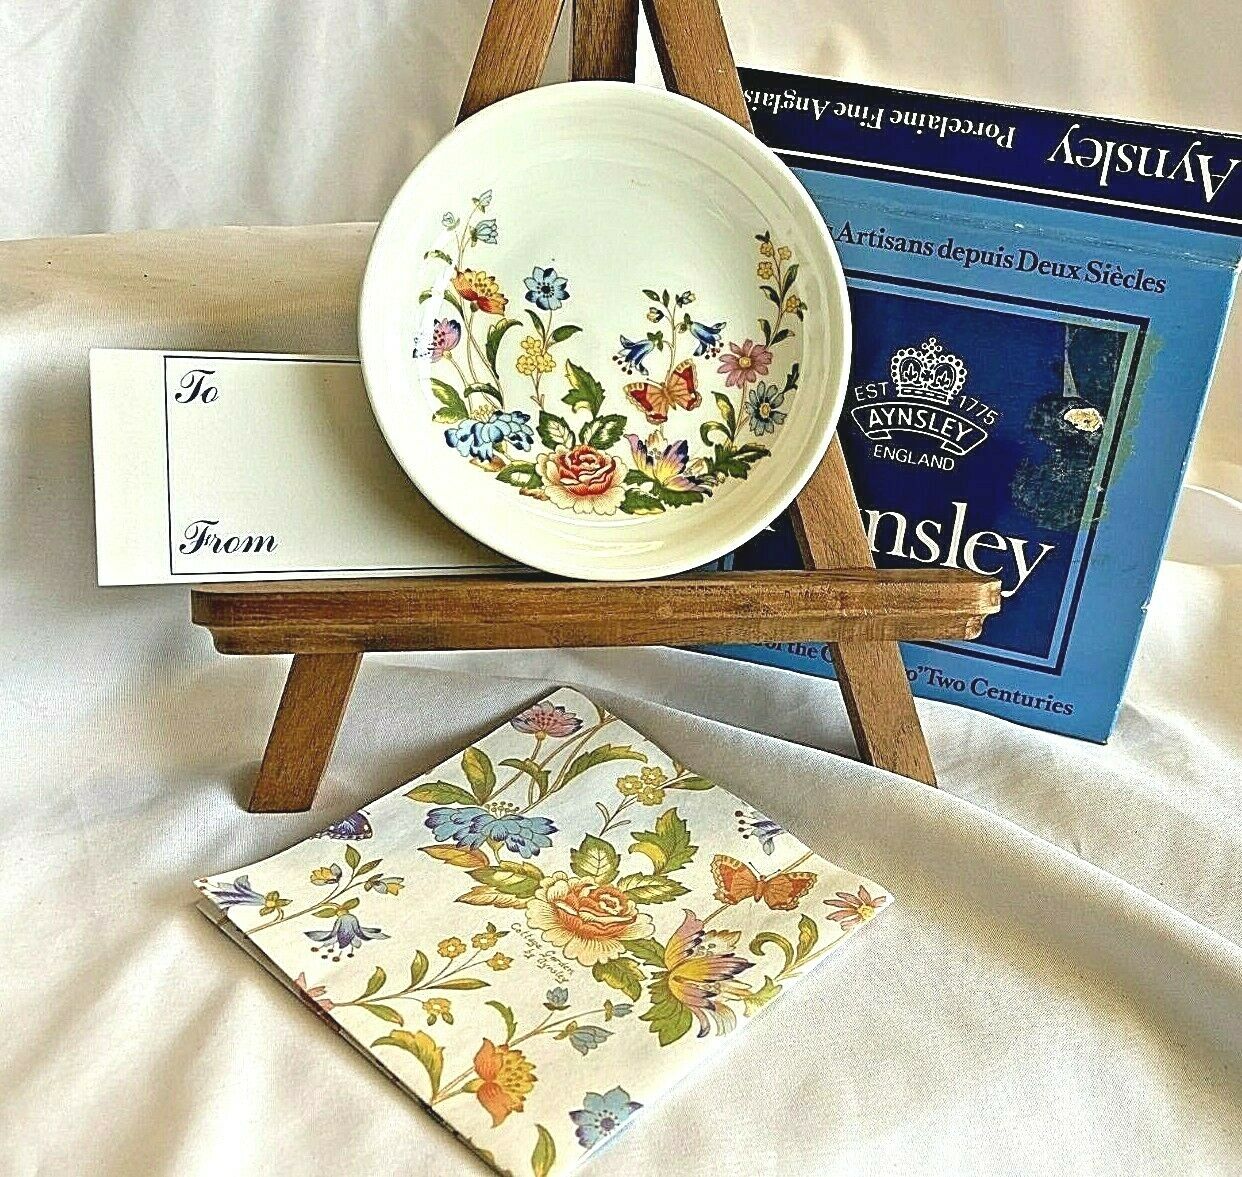 Aynsley England Bone China Cottage Garden 870 Plate Bowl Gift Set - New In Box